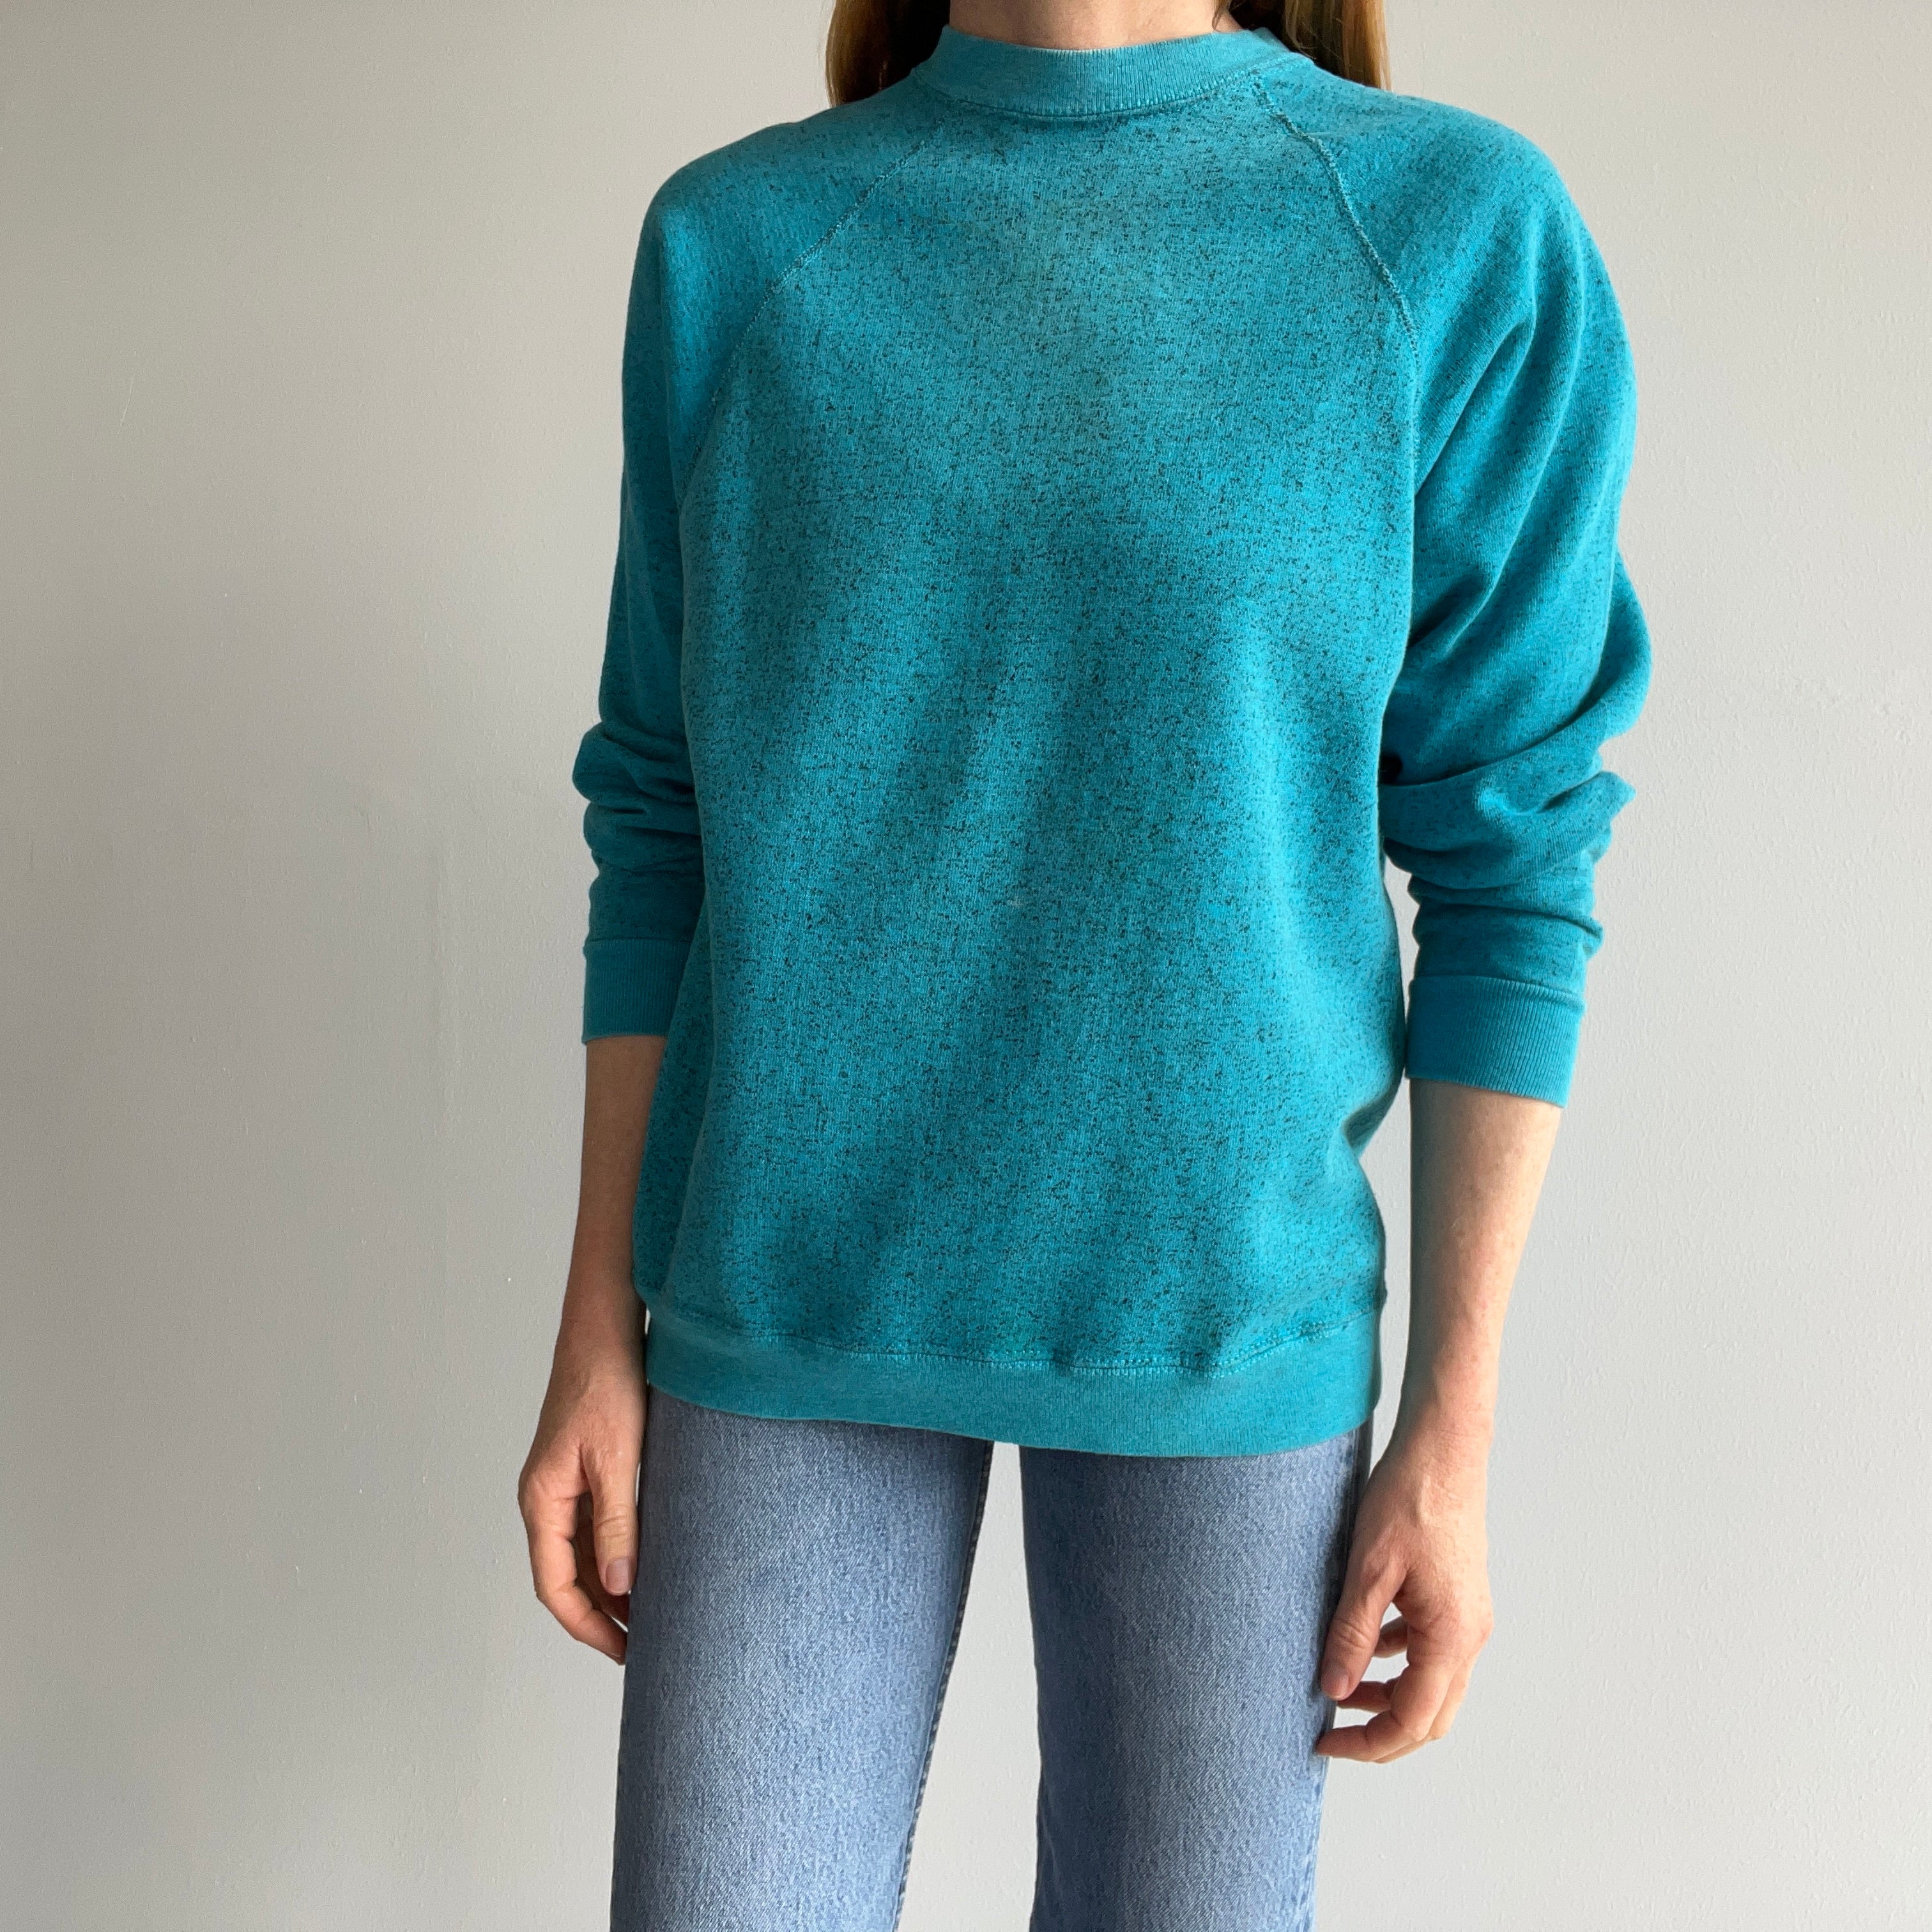 1980s Heather Turquoise Sweats Appeal by Tultex Sweatshirt - Above Average